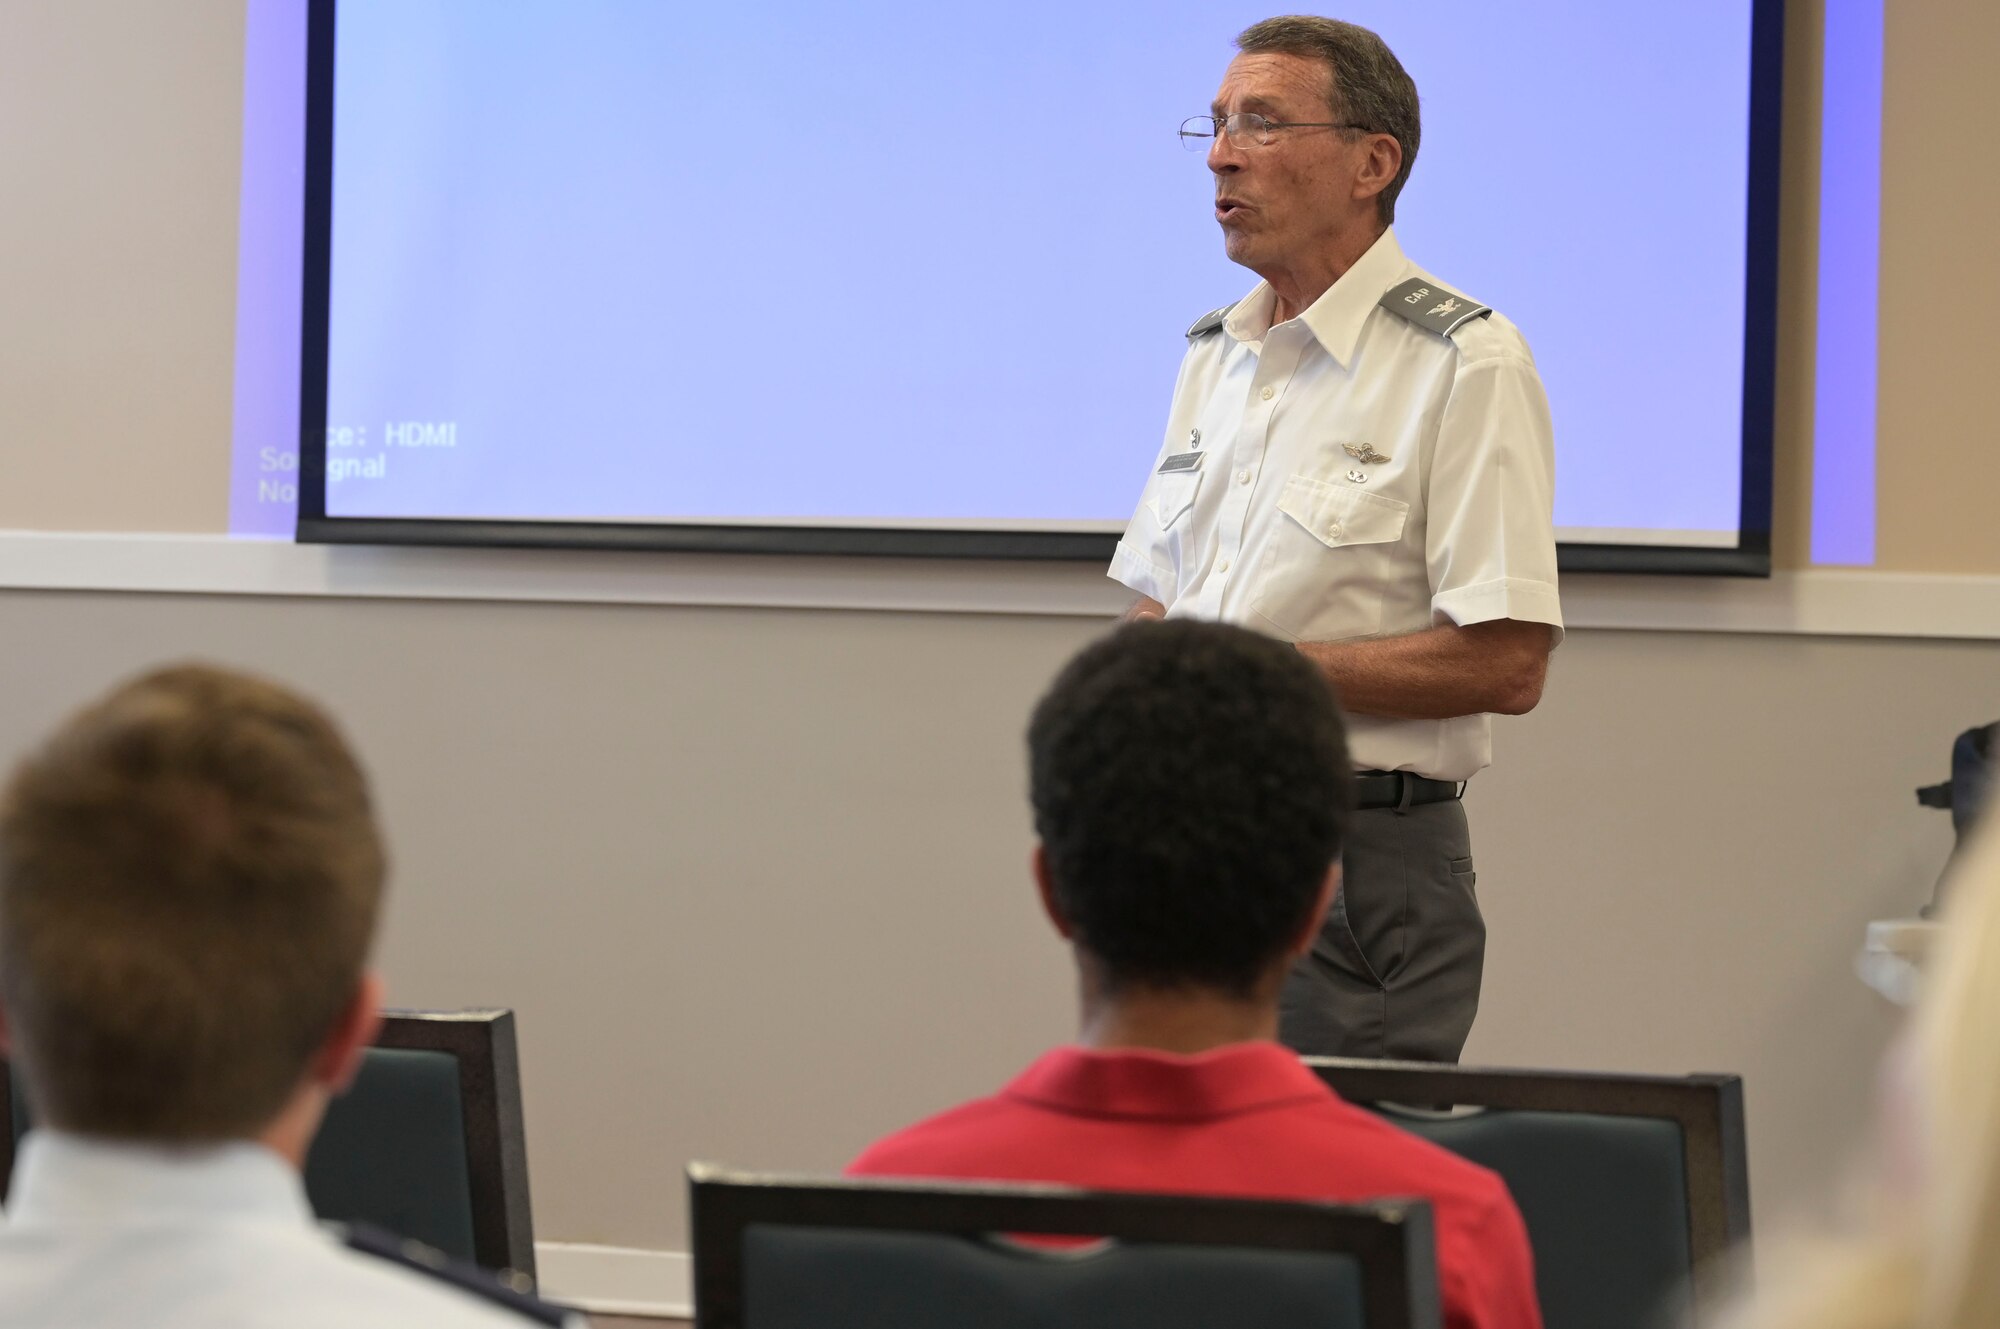 U.S. Air Force Col. Robert Mims, retired, Mississippi Civil Air Patrol Wing commander, speaks to the CAP Golden Triangle Regional Squadron about his plans for the organization, June 3, 2021, on Columbus Air Force Base, Miss. Civil Air Patrol, as the official Auxiliary of the United States Air Force, and, as a humanitarian, non-profit organization, has garnered the support and commitment of its 61,000+ volunteer members nationwide. (U.S. Air Force photo by Airman 1st Class Jessica Haynie)